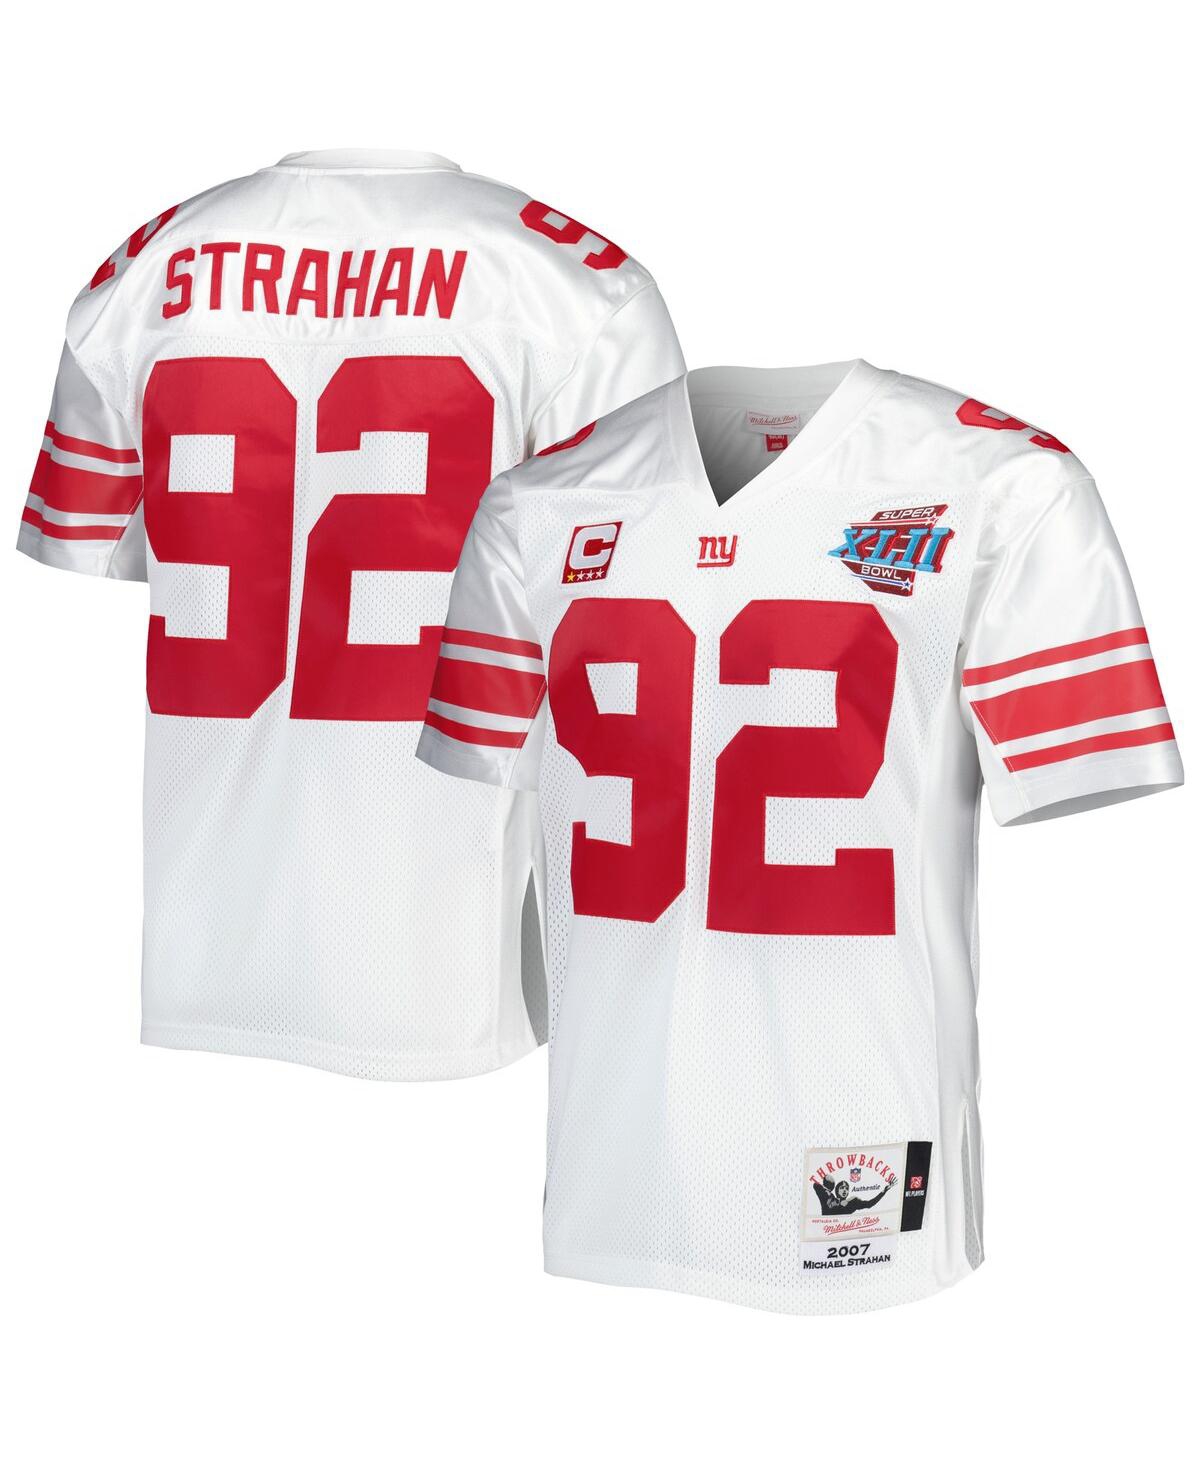 Men's Mitchell & Ness Michael Strahan White New York Giants Super Bowl Xlii Authentic Throwback Retired Player Jersey - White